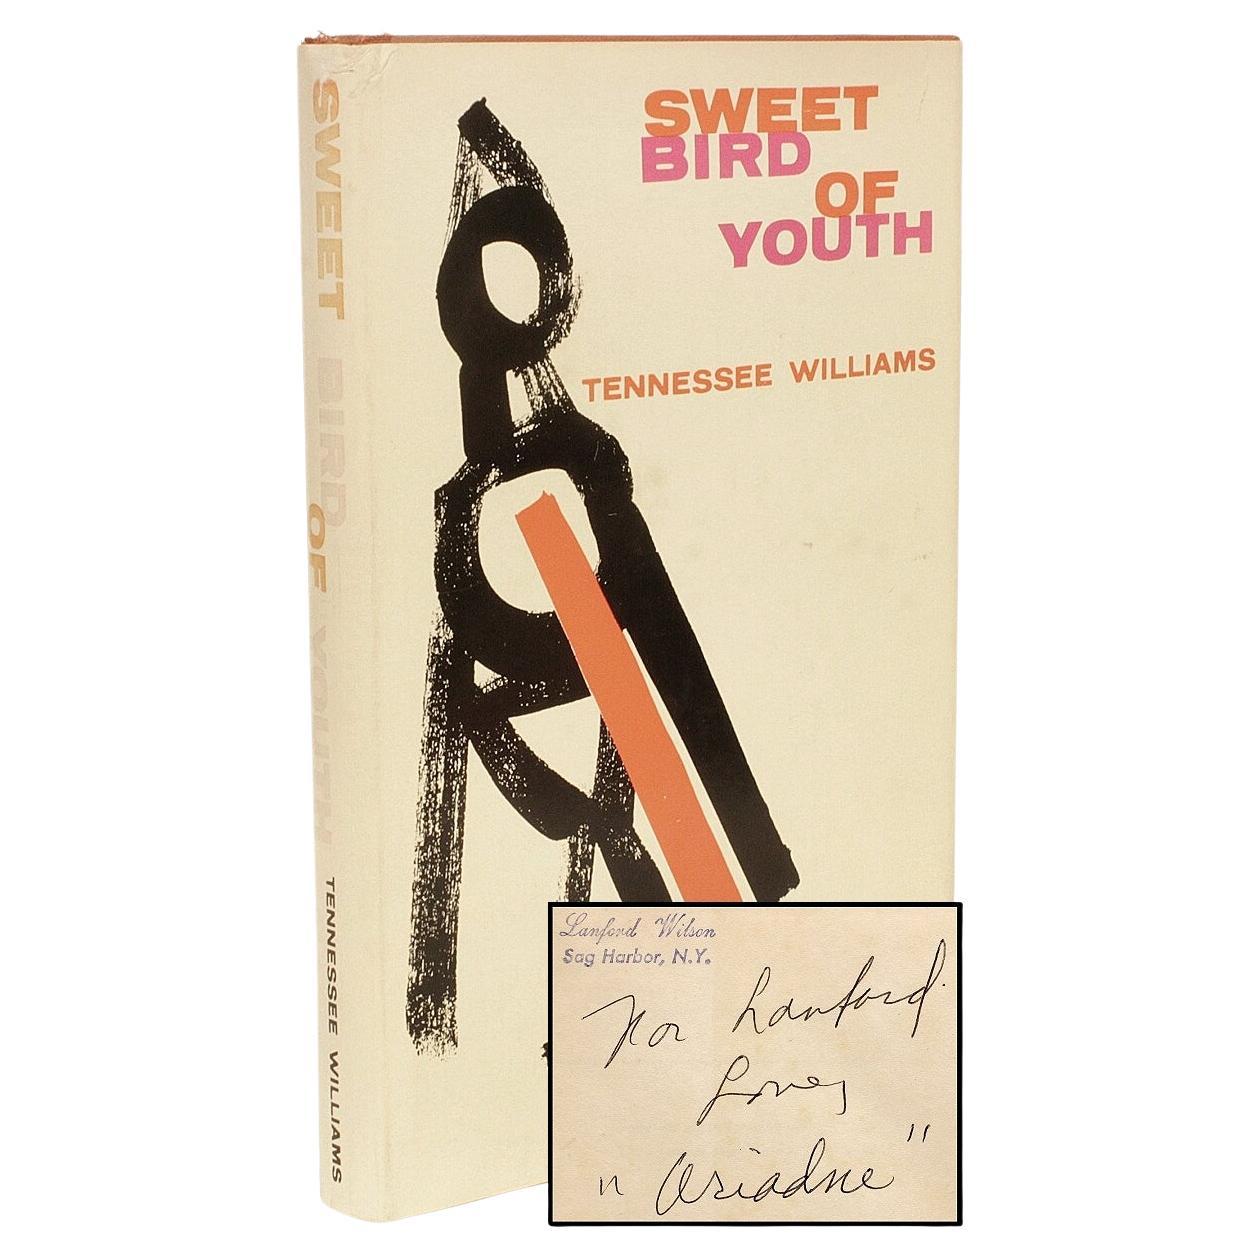 Williams, Tennessee, Sweet Bird of Youth, 'First Edition, Inscribed, 1959' For Sale